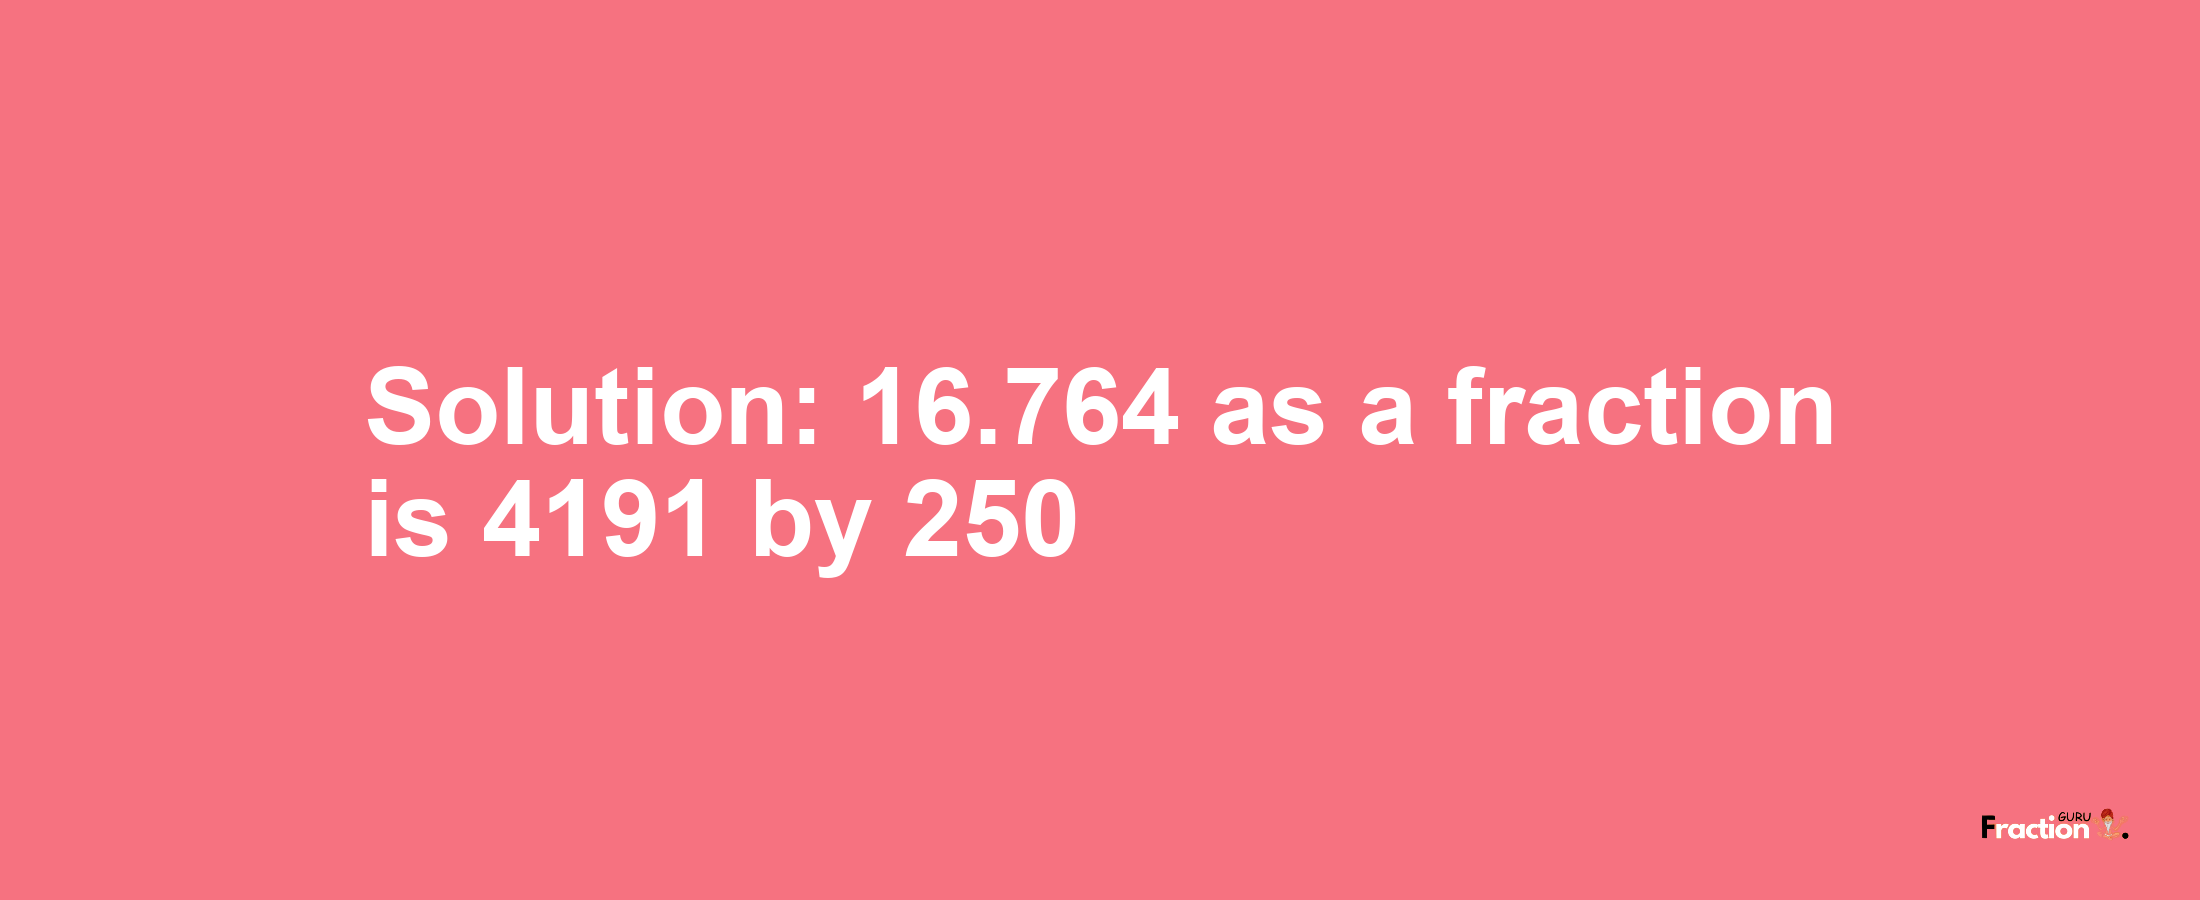 Solution:16.764 as a fraction is 4191/250